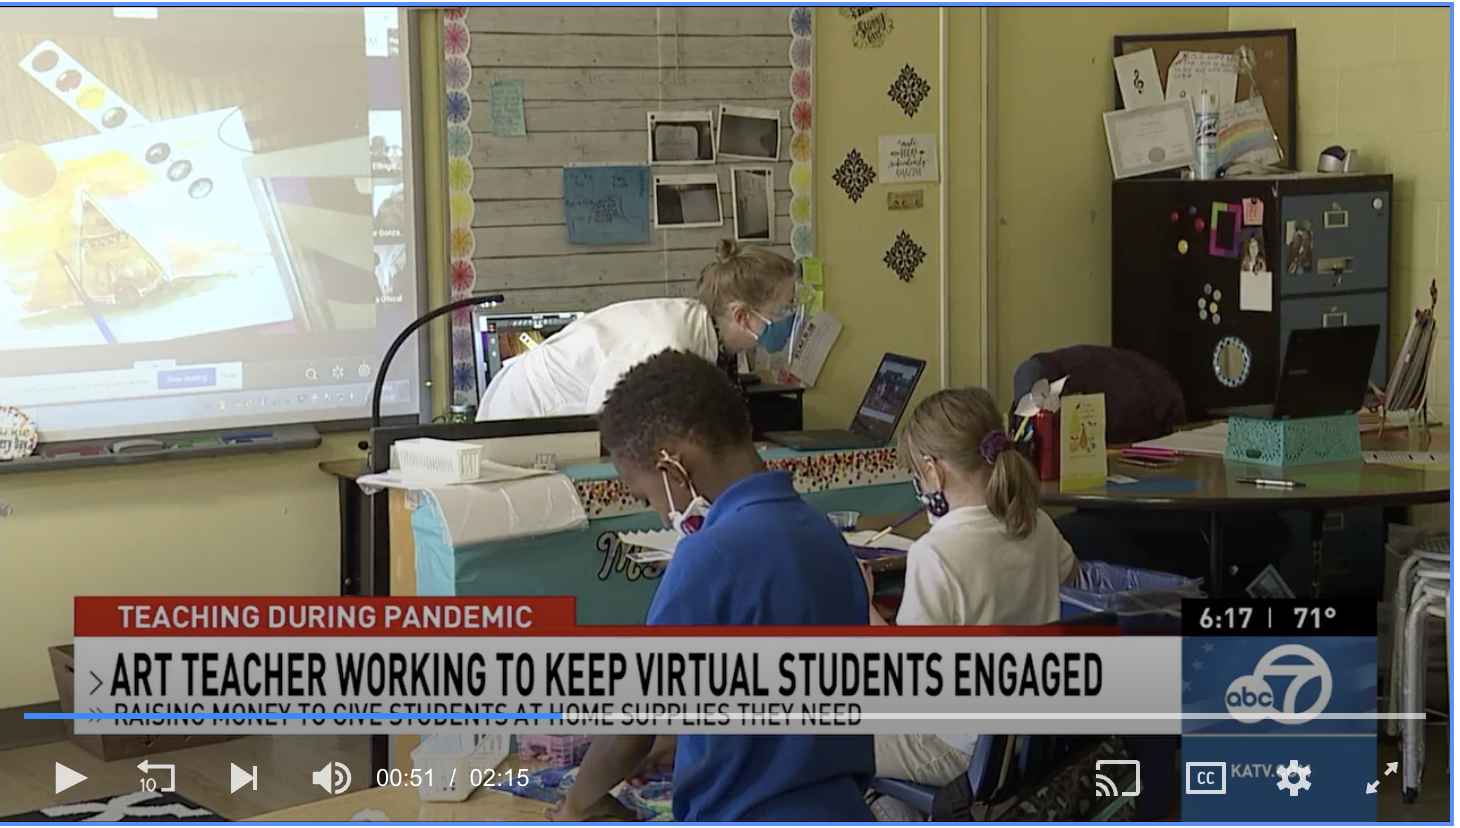 KATV: Art teachers get creative with hands-on assignments during remote learning